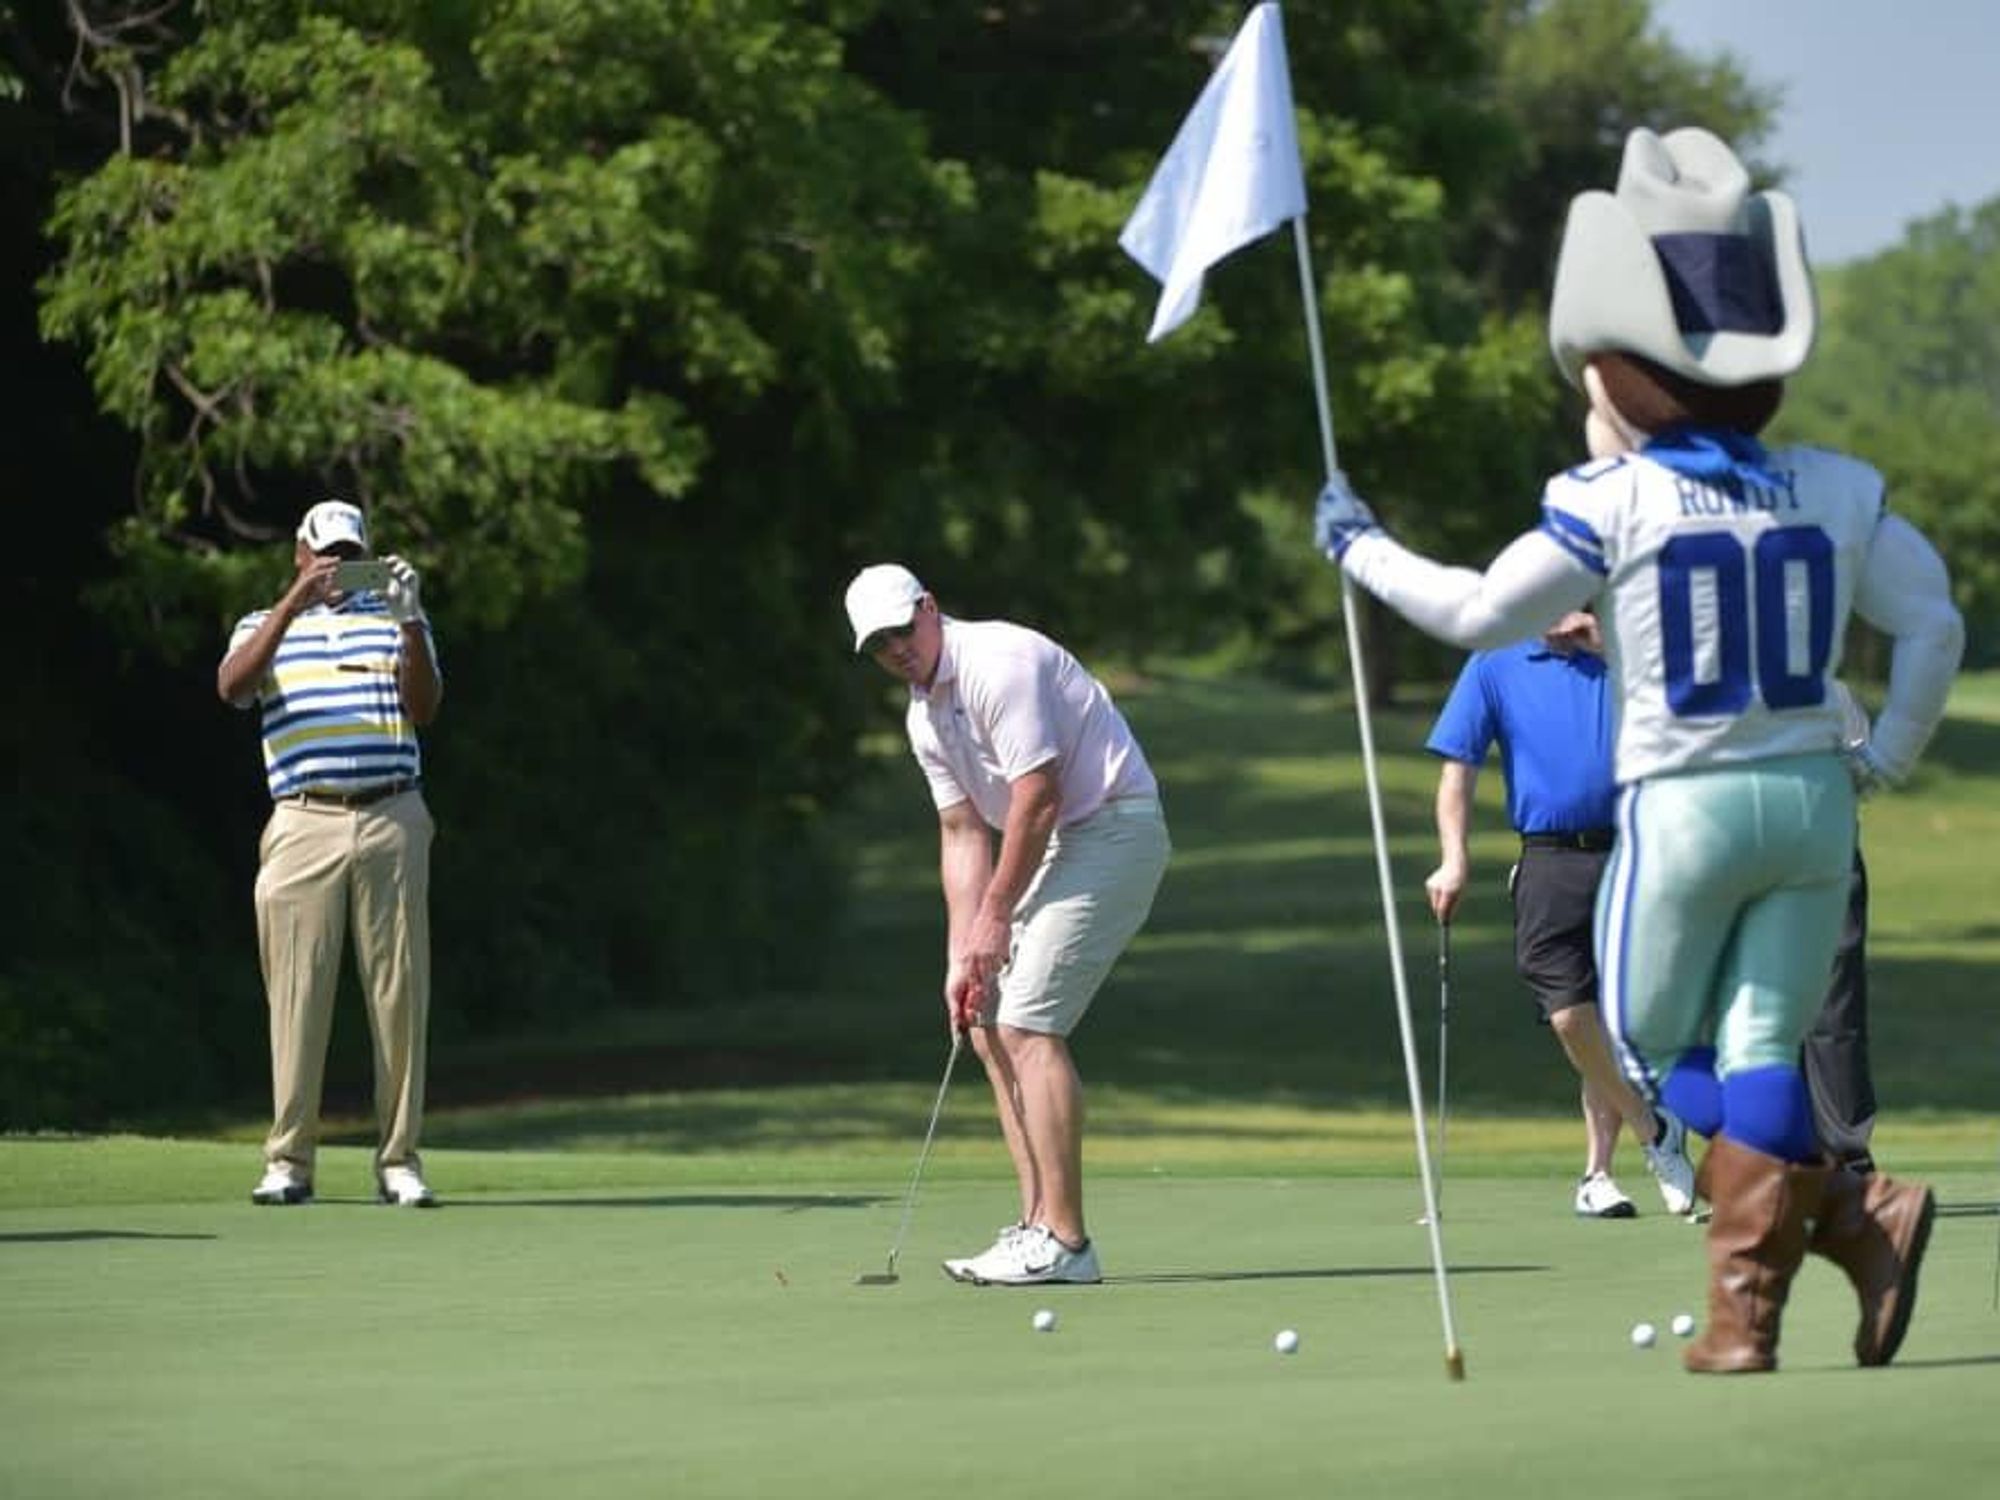 Men playing golf with Rowdy mascot